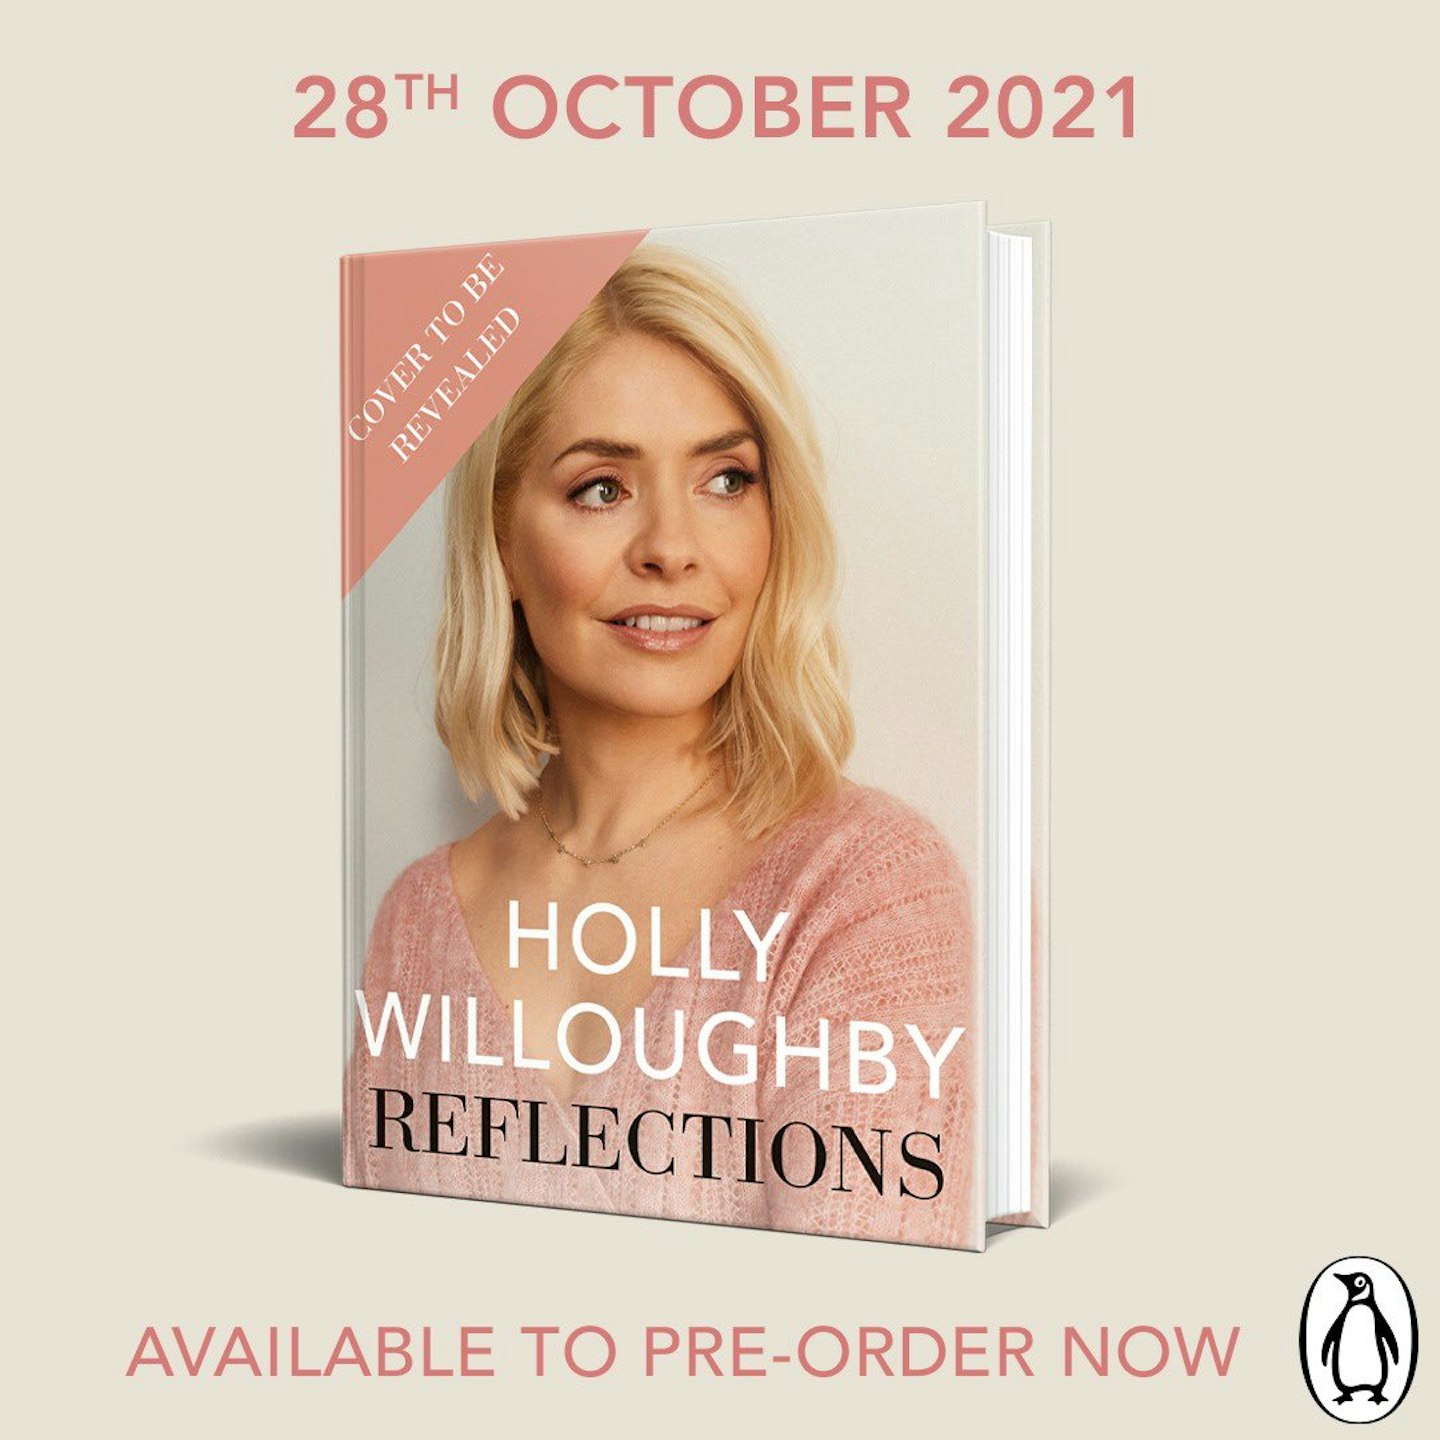 Holly Willoughby's book Reflections